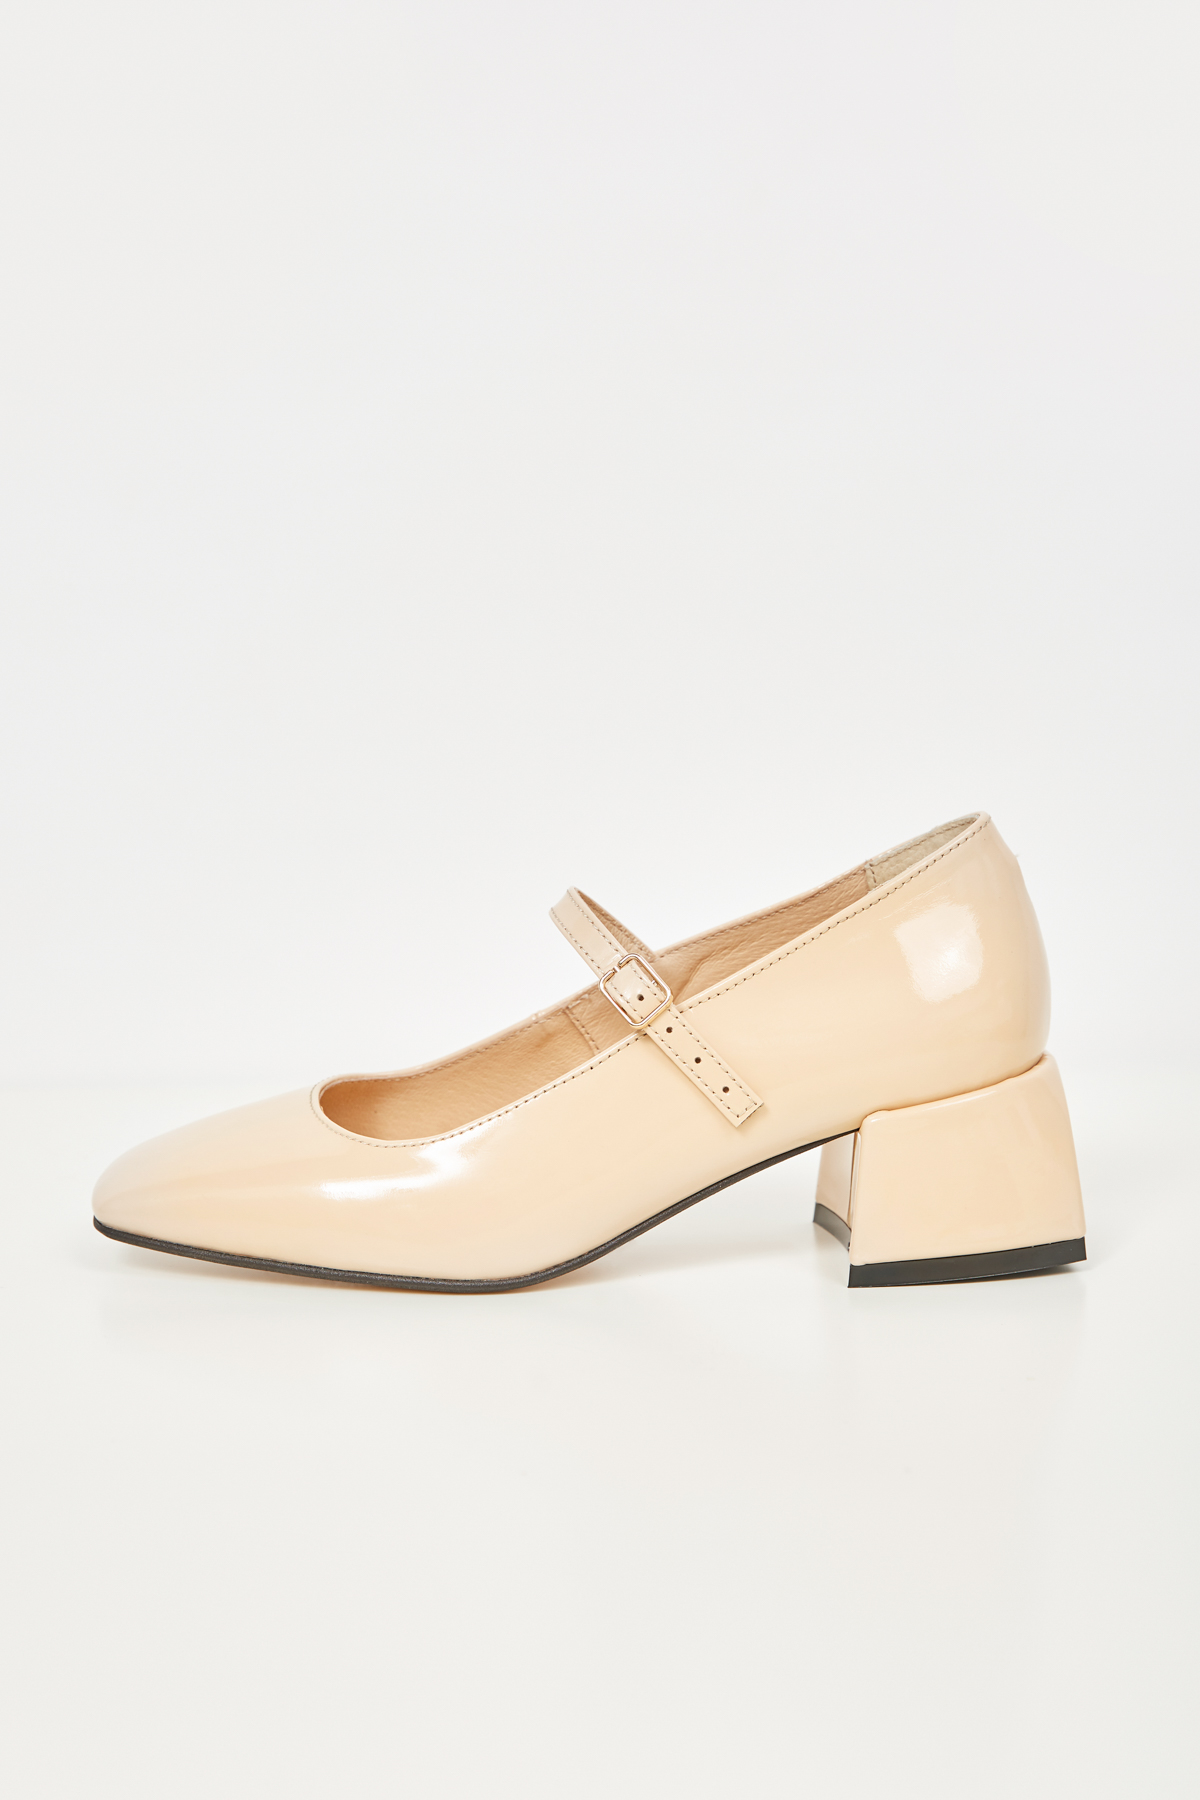 Beige patent leather shoes, photo 1